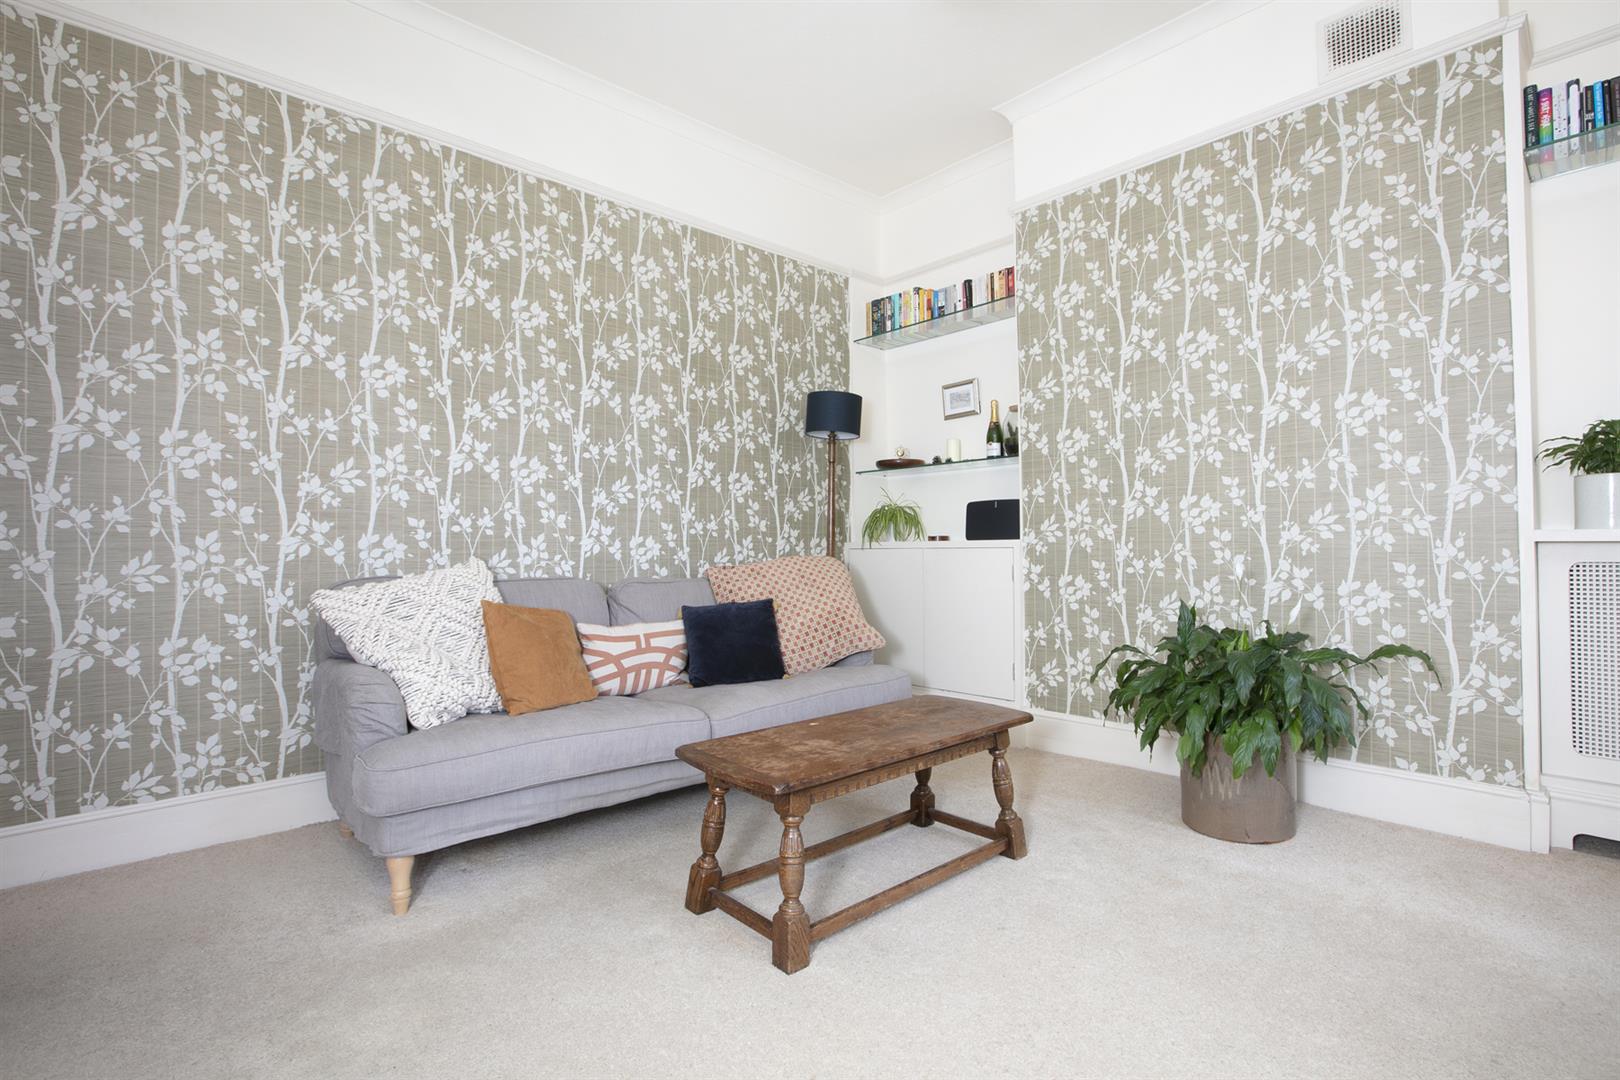 Flat - Conversion For Sale in Peckham Road, Camberwell, SE5 859 view5